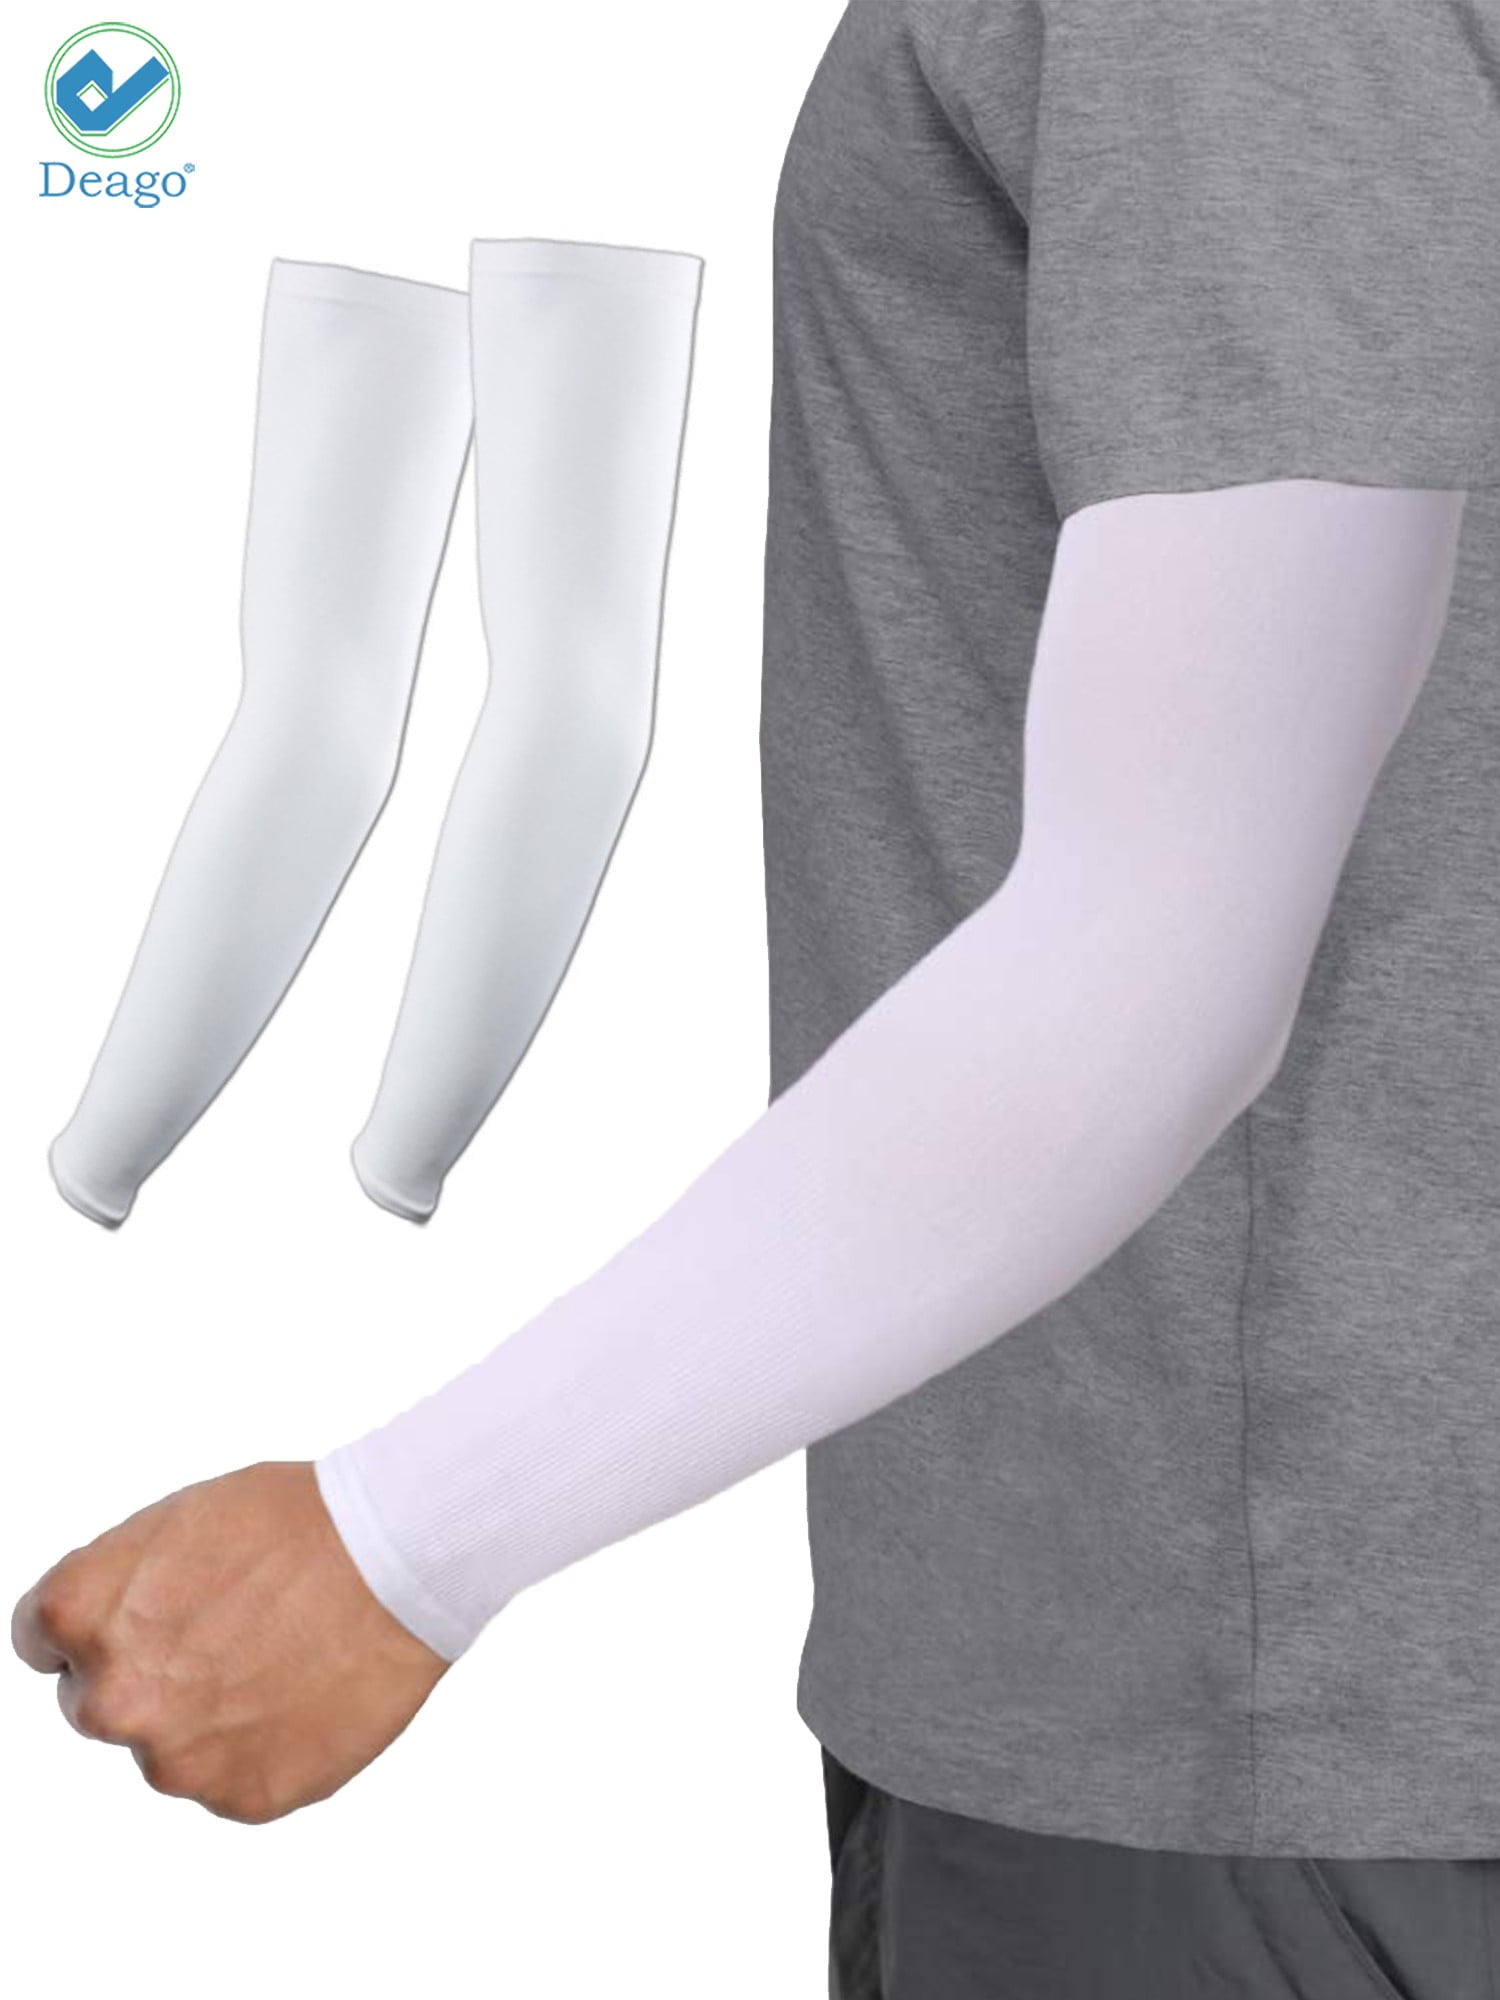 5PCS UV Sun Protection Cooling Arm Sleeves UPF 50 Compression Arm Cover Shield 